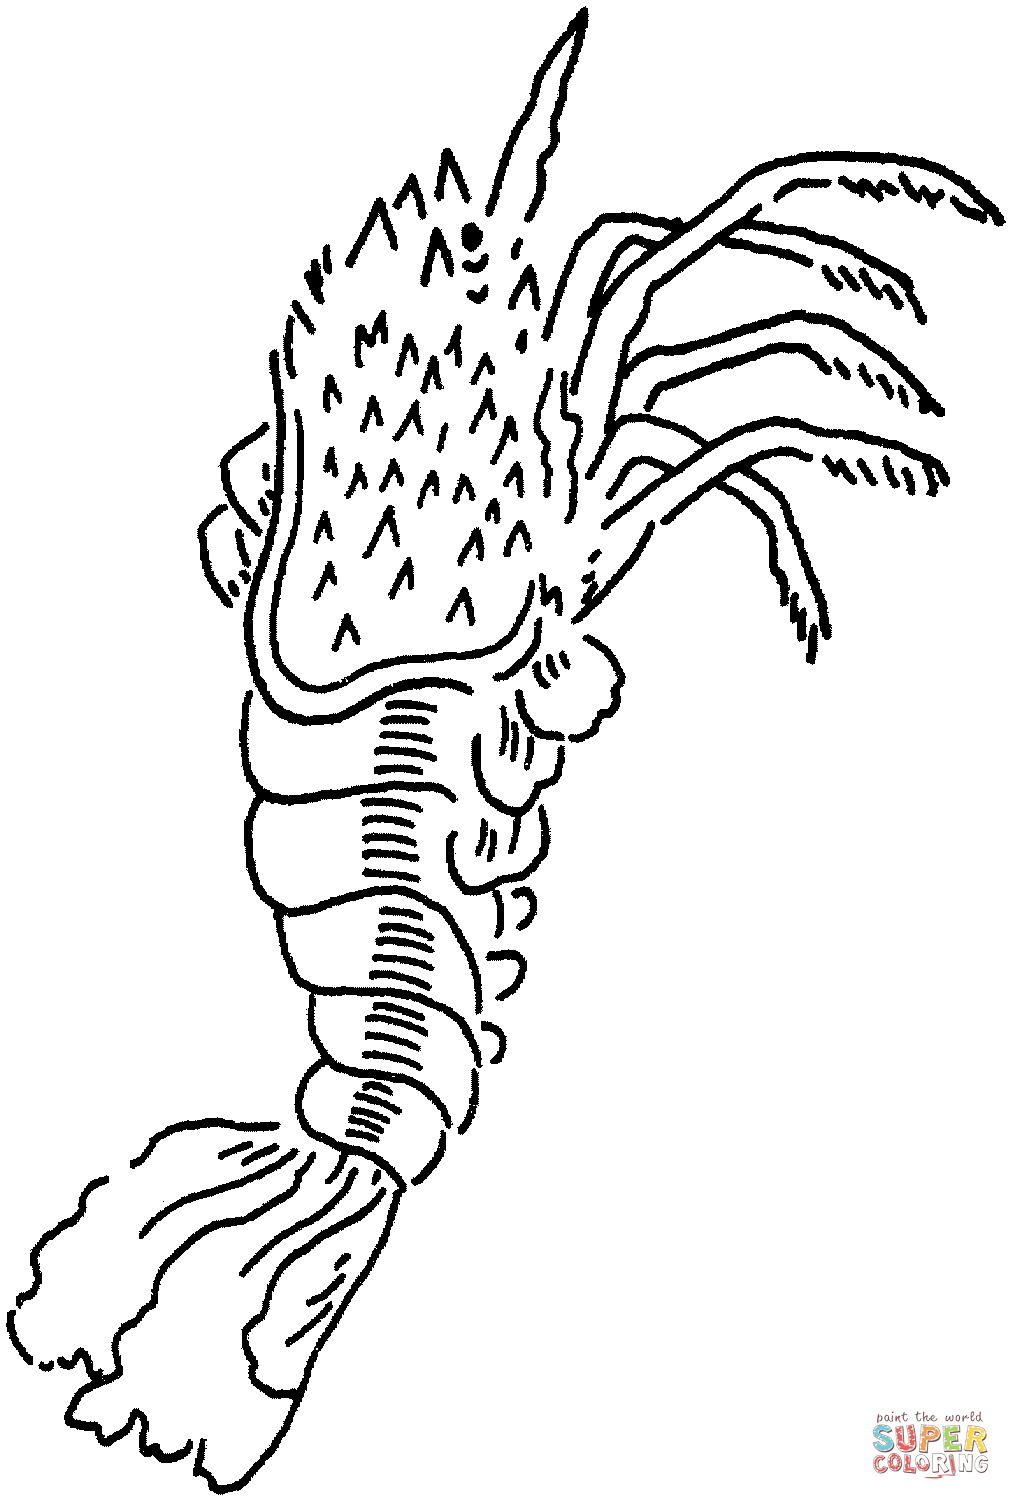 Spiny Lobster coloring #9, Download drawings